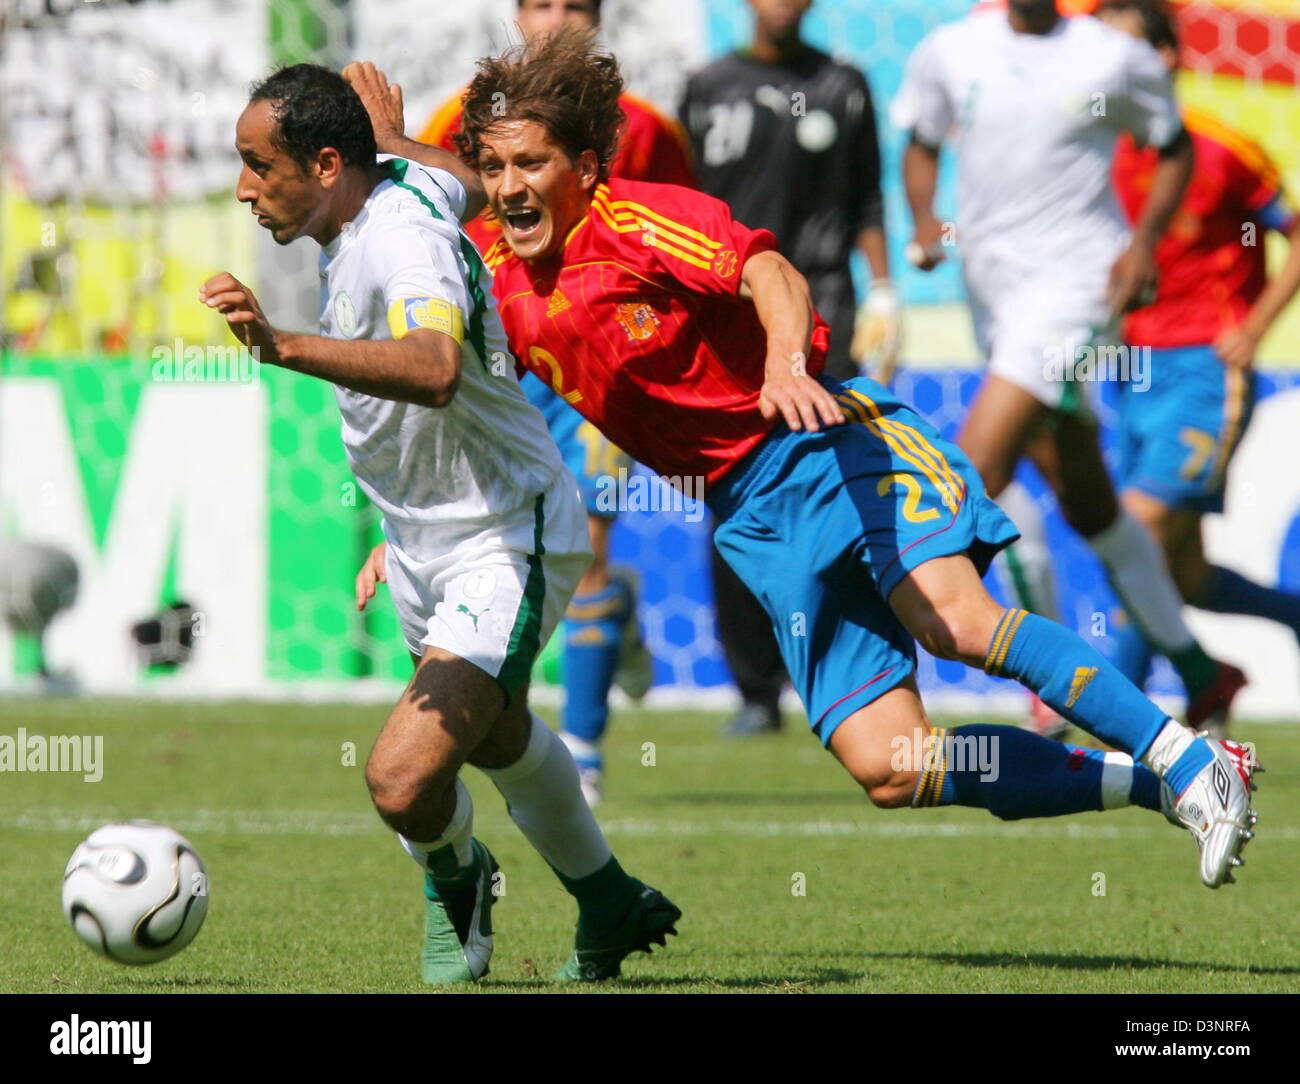 Michel Salgado (R) of Spain and Sami Al Jaber of Saudi Arabia during the 2006 FIFA World Cup group H match of Saudi Arabia vs Spain in Kaiserslautern, Germany, Friday 23 June 2006. DPA/ARNE DEDERT +++ Mobile Services OUT +++ Please also refer to FIFA's Terms and Conditions. +++(c) dpa - Bildfunk+++ Stock Photo